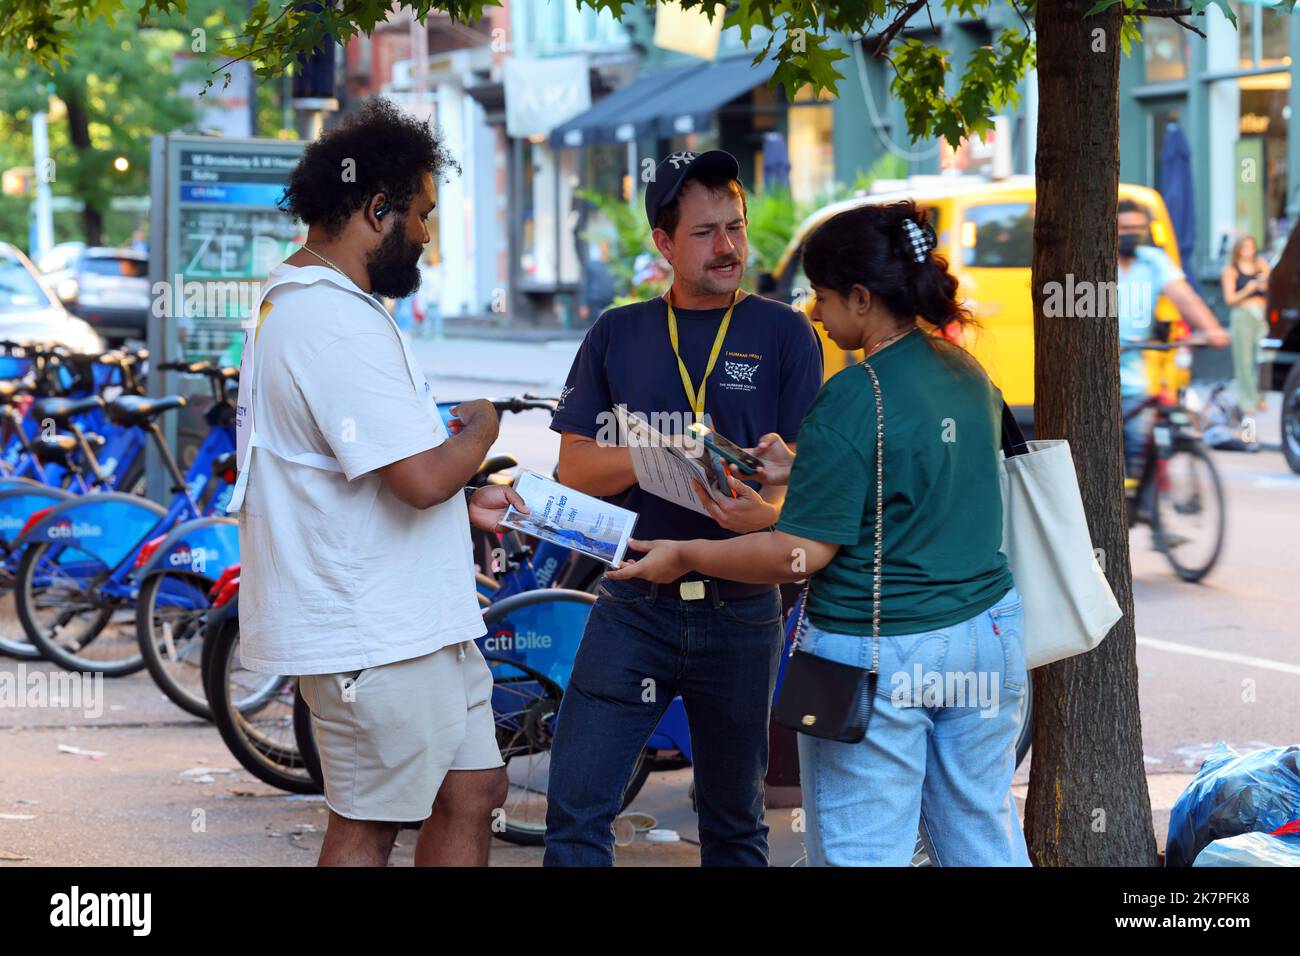 Street canvassers in New York canvassing for the charitable organization Humane Society soliciting info and donations from people on the sidewalk Stock Photo